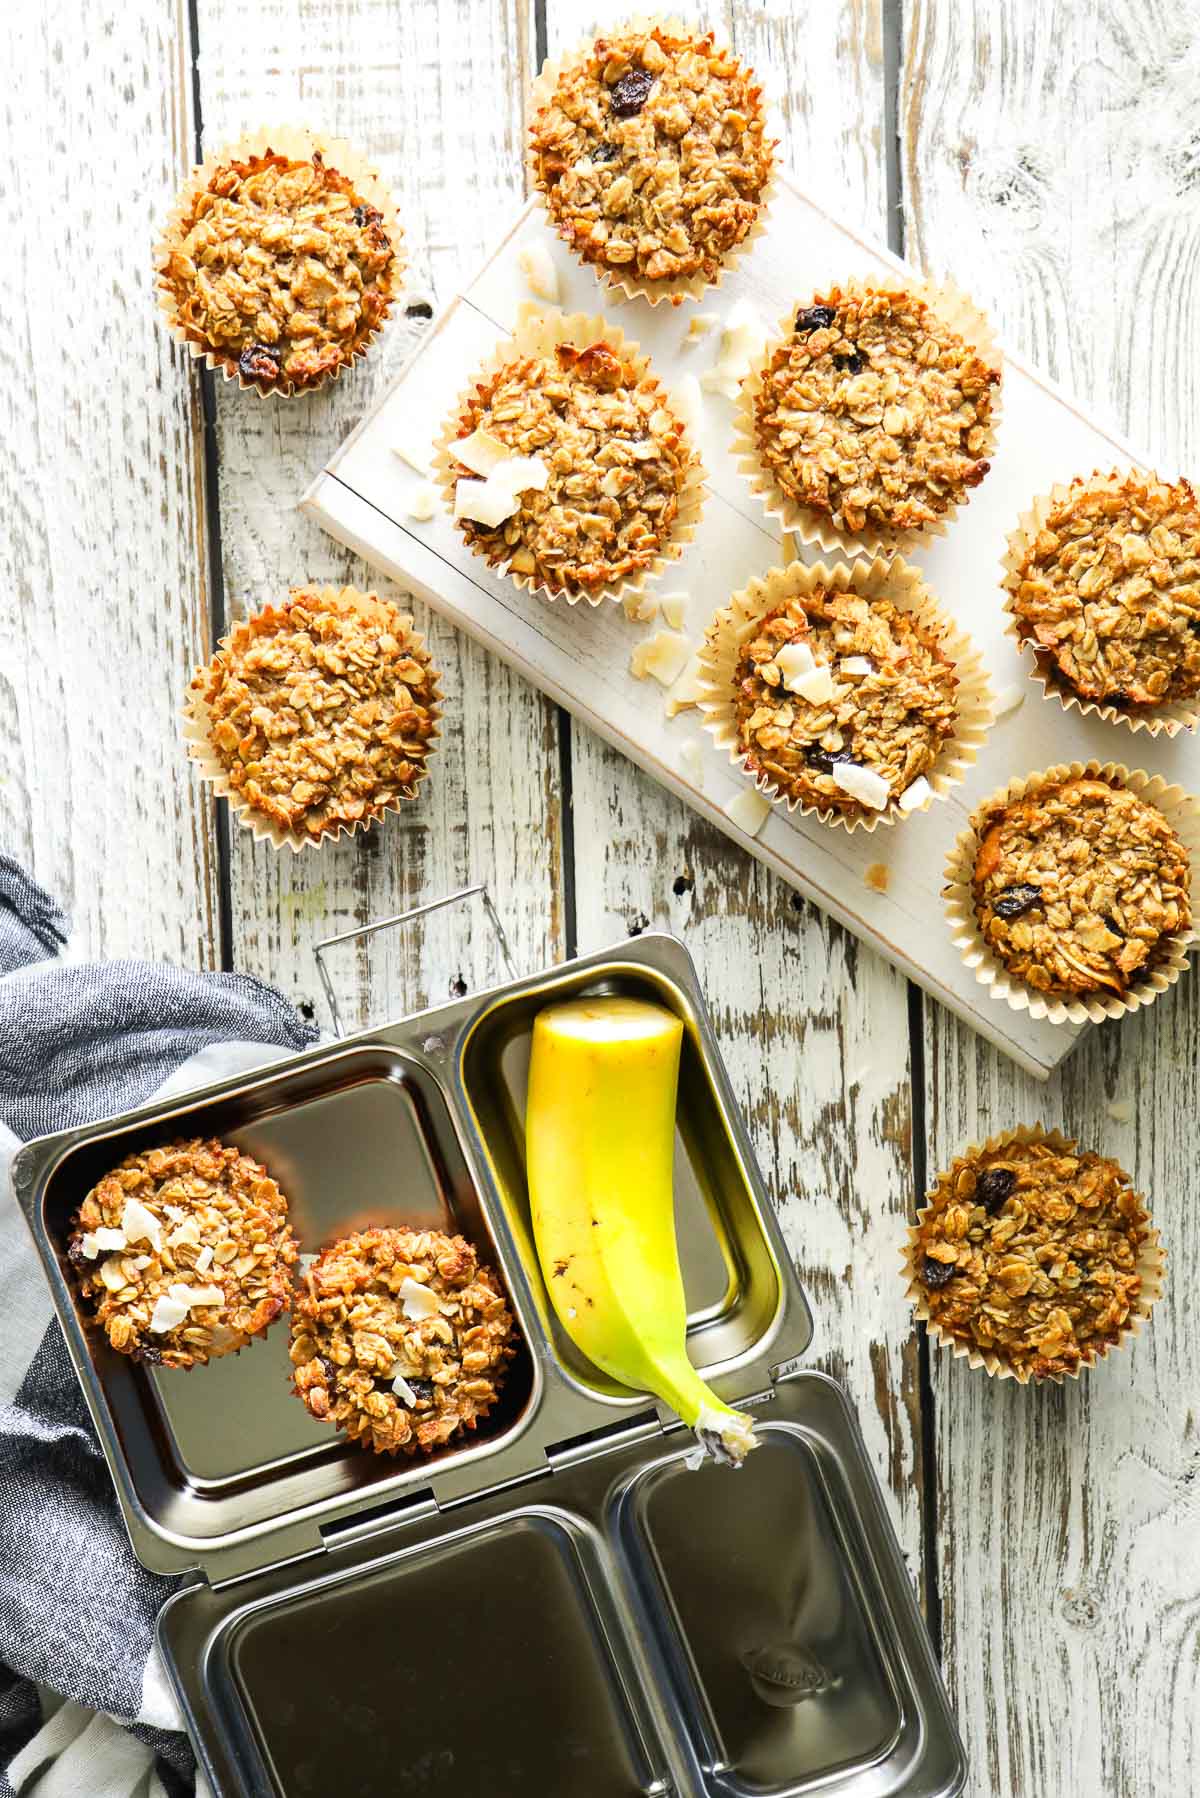 Baked oatmeal cups on a cutting board and lunchbox with a banana on the side.